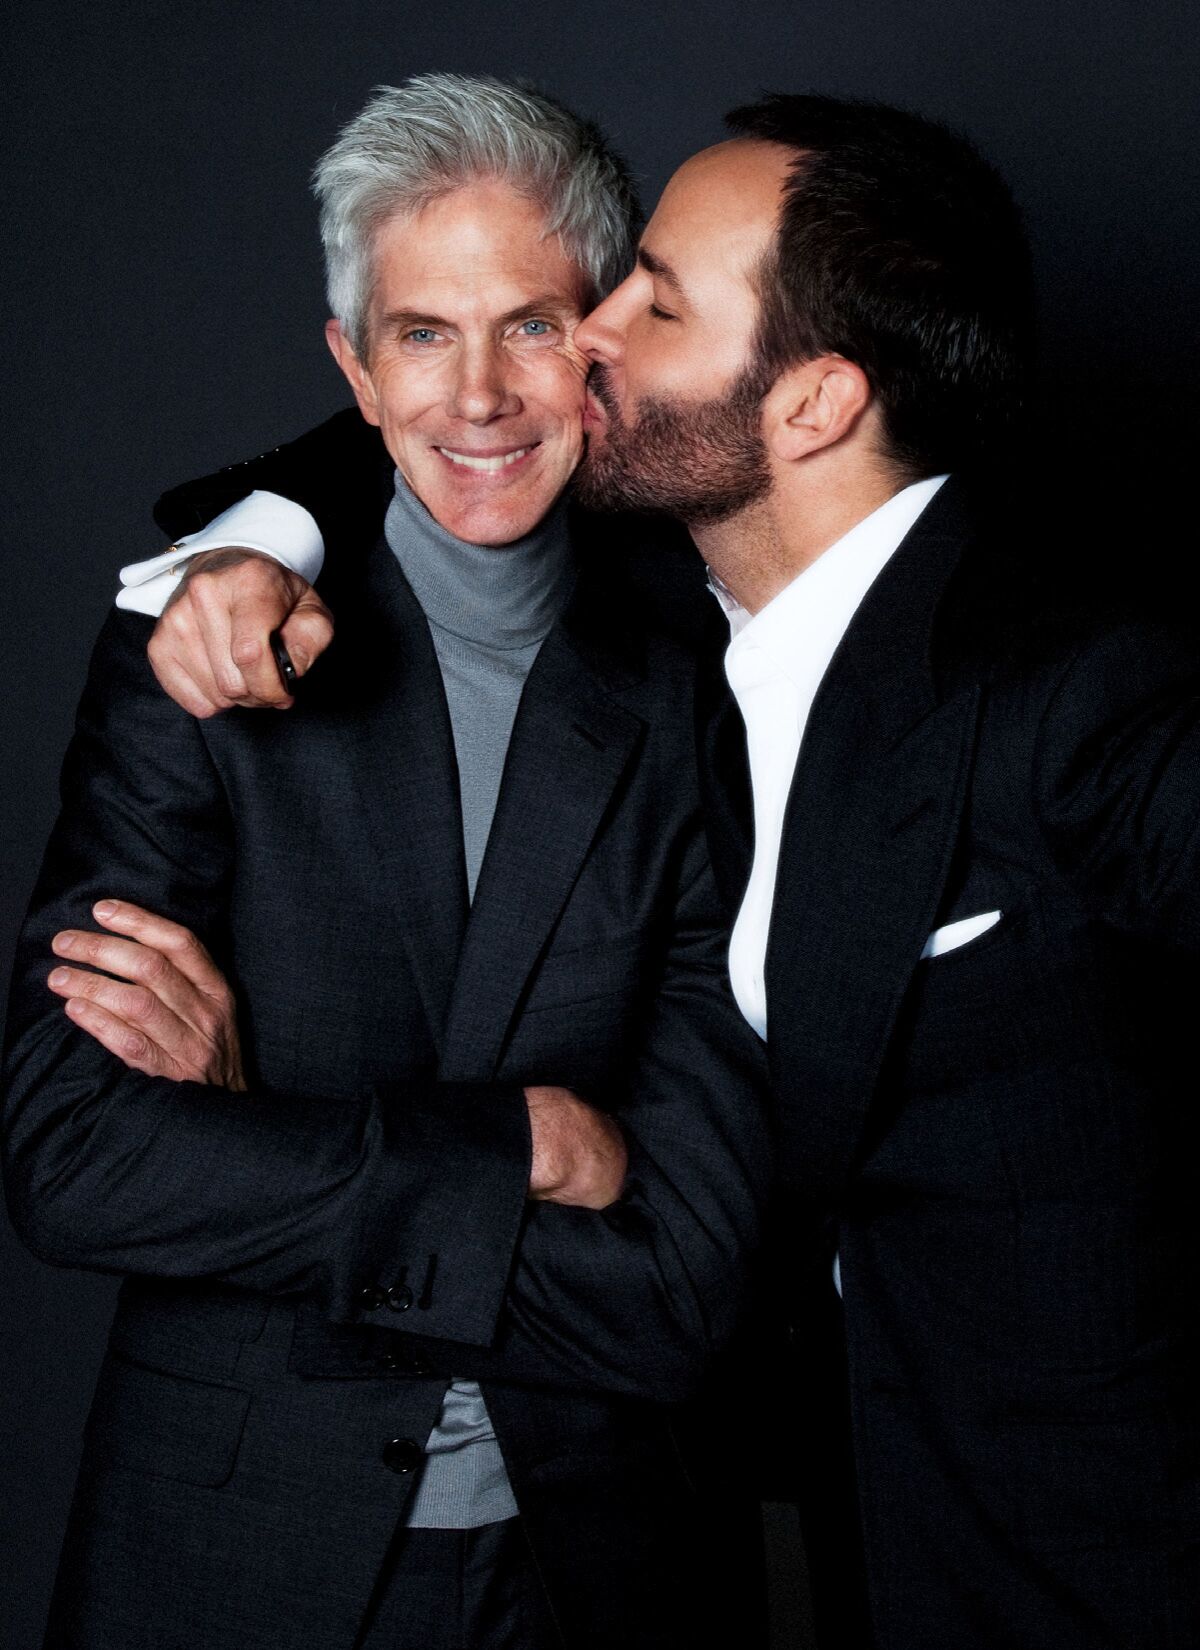 A man in a suit gets a kiss on the cheek.